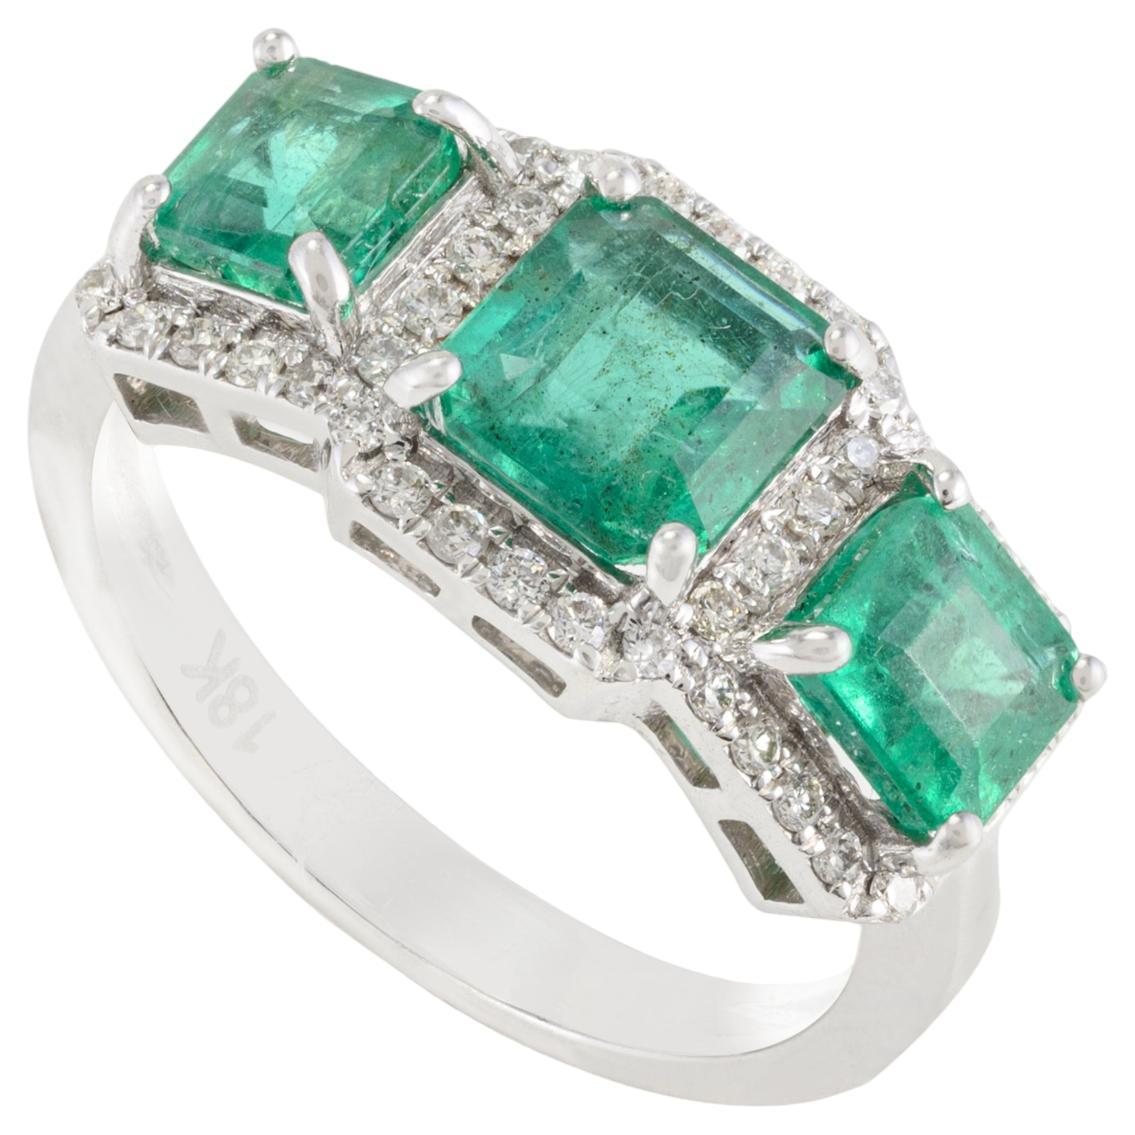 For Sale:  Three Stone Genuine Emerald Ring with Halo Diamond in 18k Solid White Gold